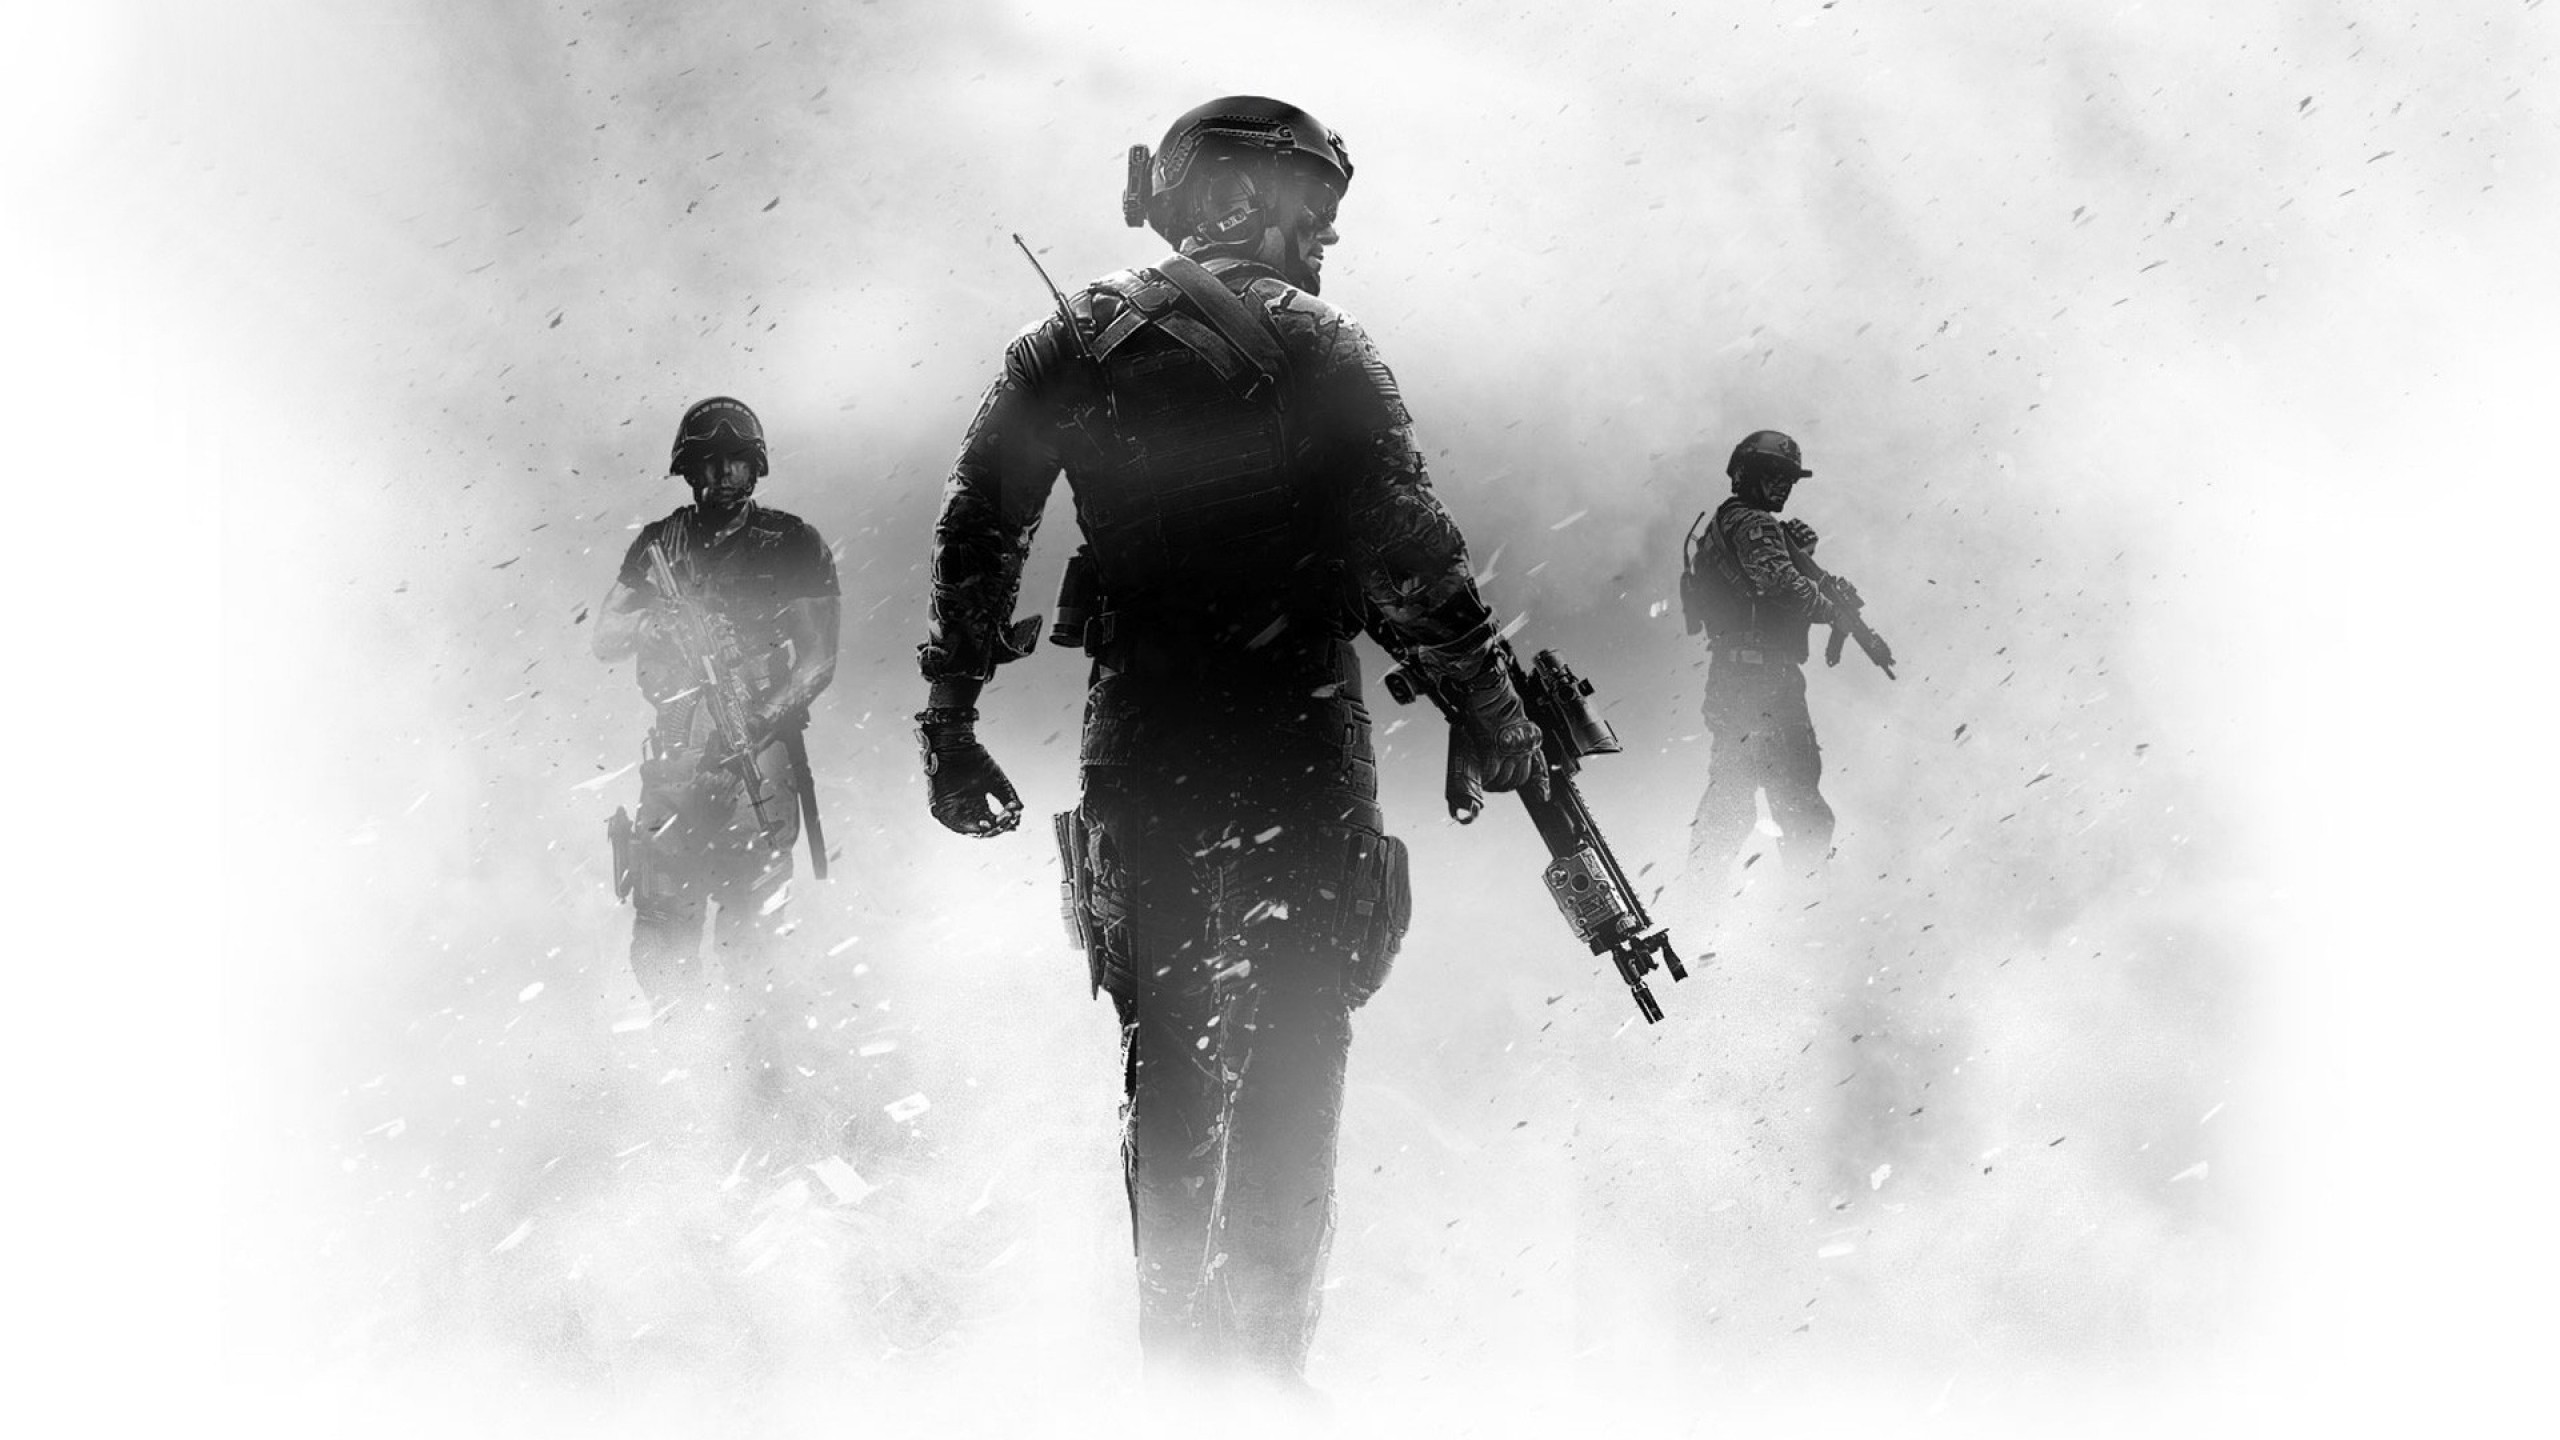 Call of duty warzone mobile на телефон. Call of Duty 4 Modern Warfare 3. Call of Duty: Modern Warfare (2019). Call of Duty Modern Warfare 2 солдаты. Call of Duty 4 Modern Warfare.